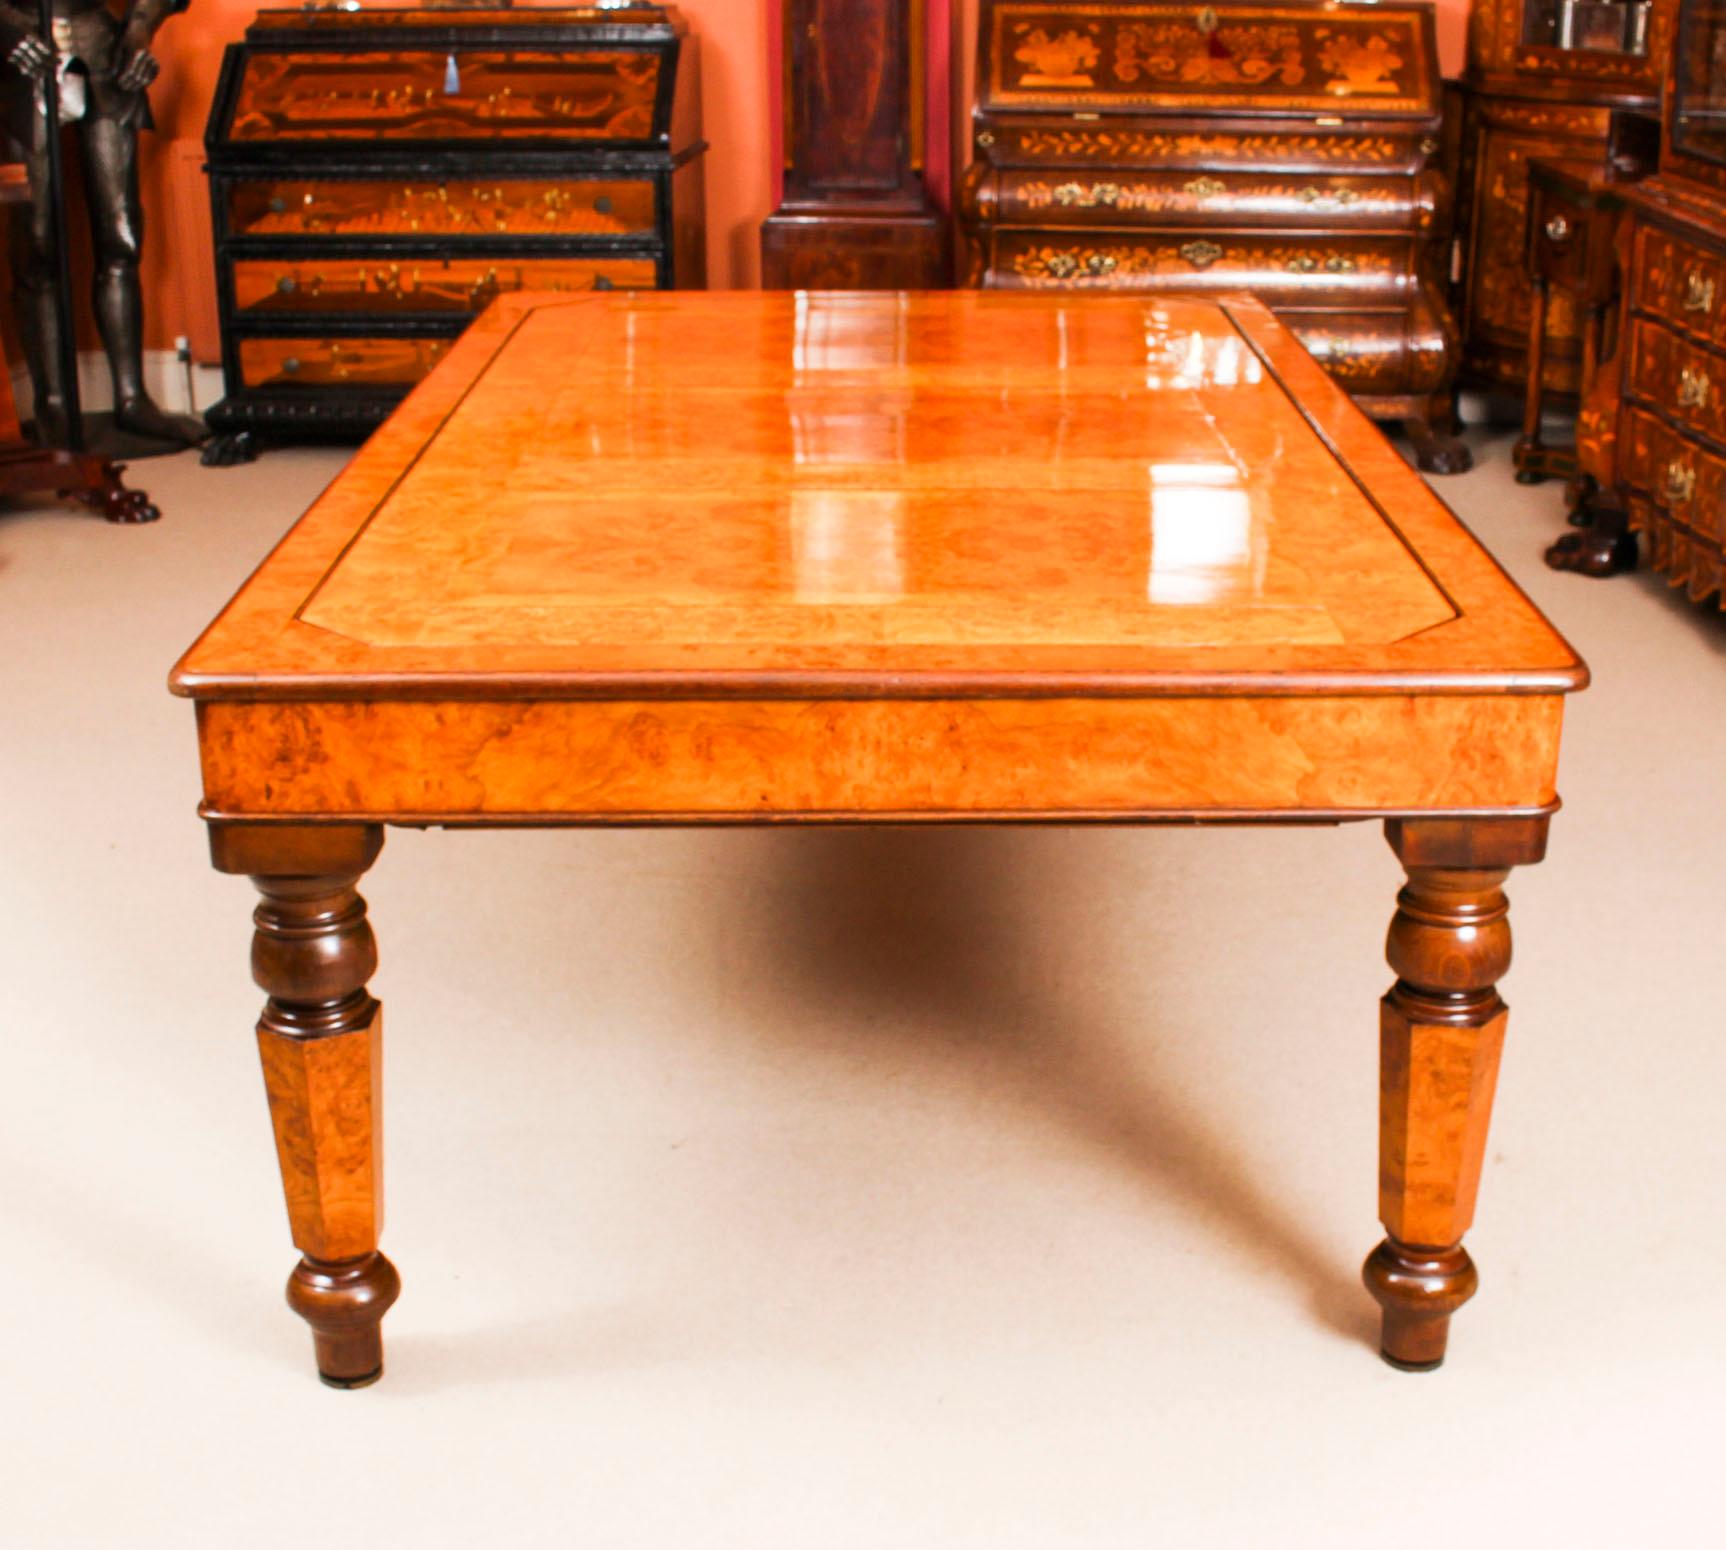 There is no mistaking the style and sophisticated design of this exquisite and rare English Victorian Pollard oak revolving (or rollover) snooker dining table with score board, circa 1870 in date. Bearing an ivorine label showing the maker to be